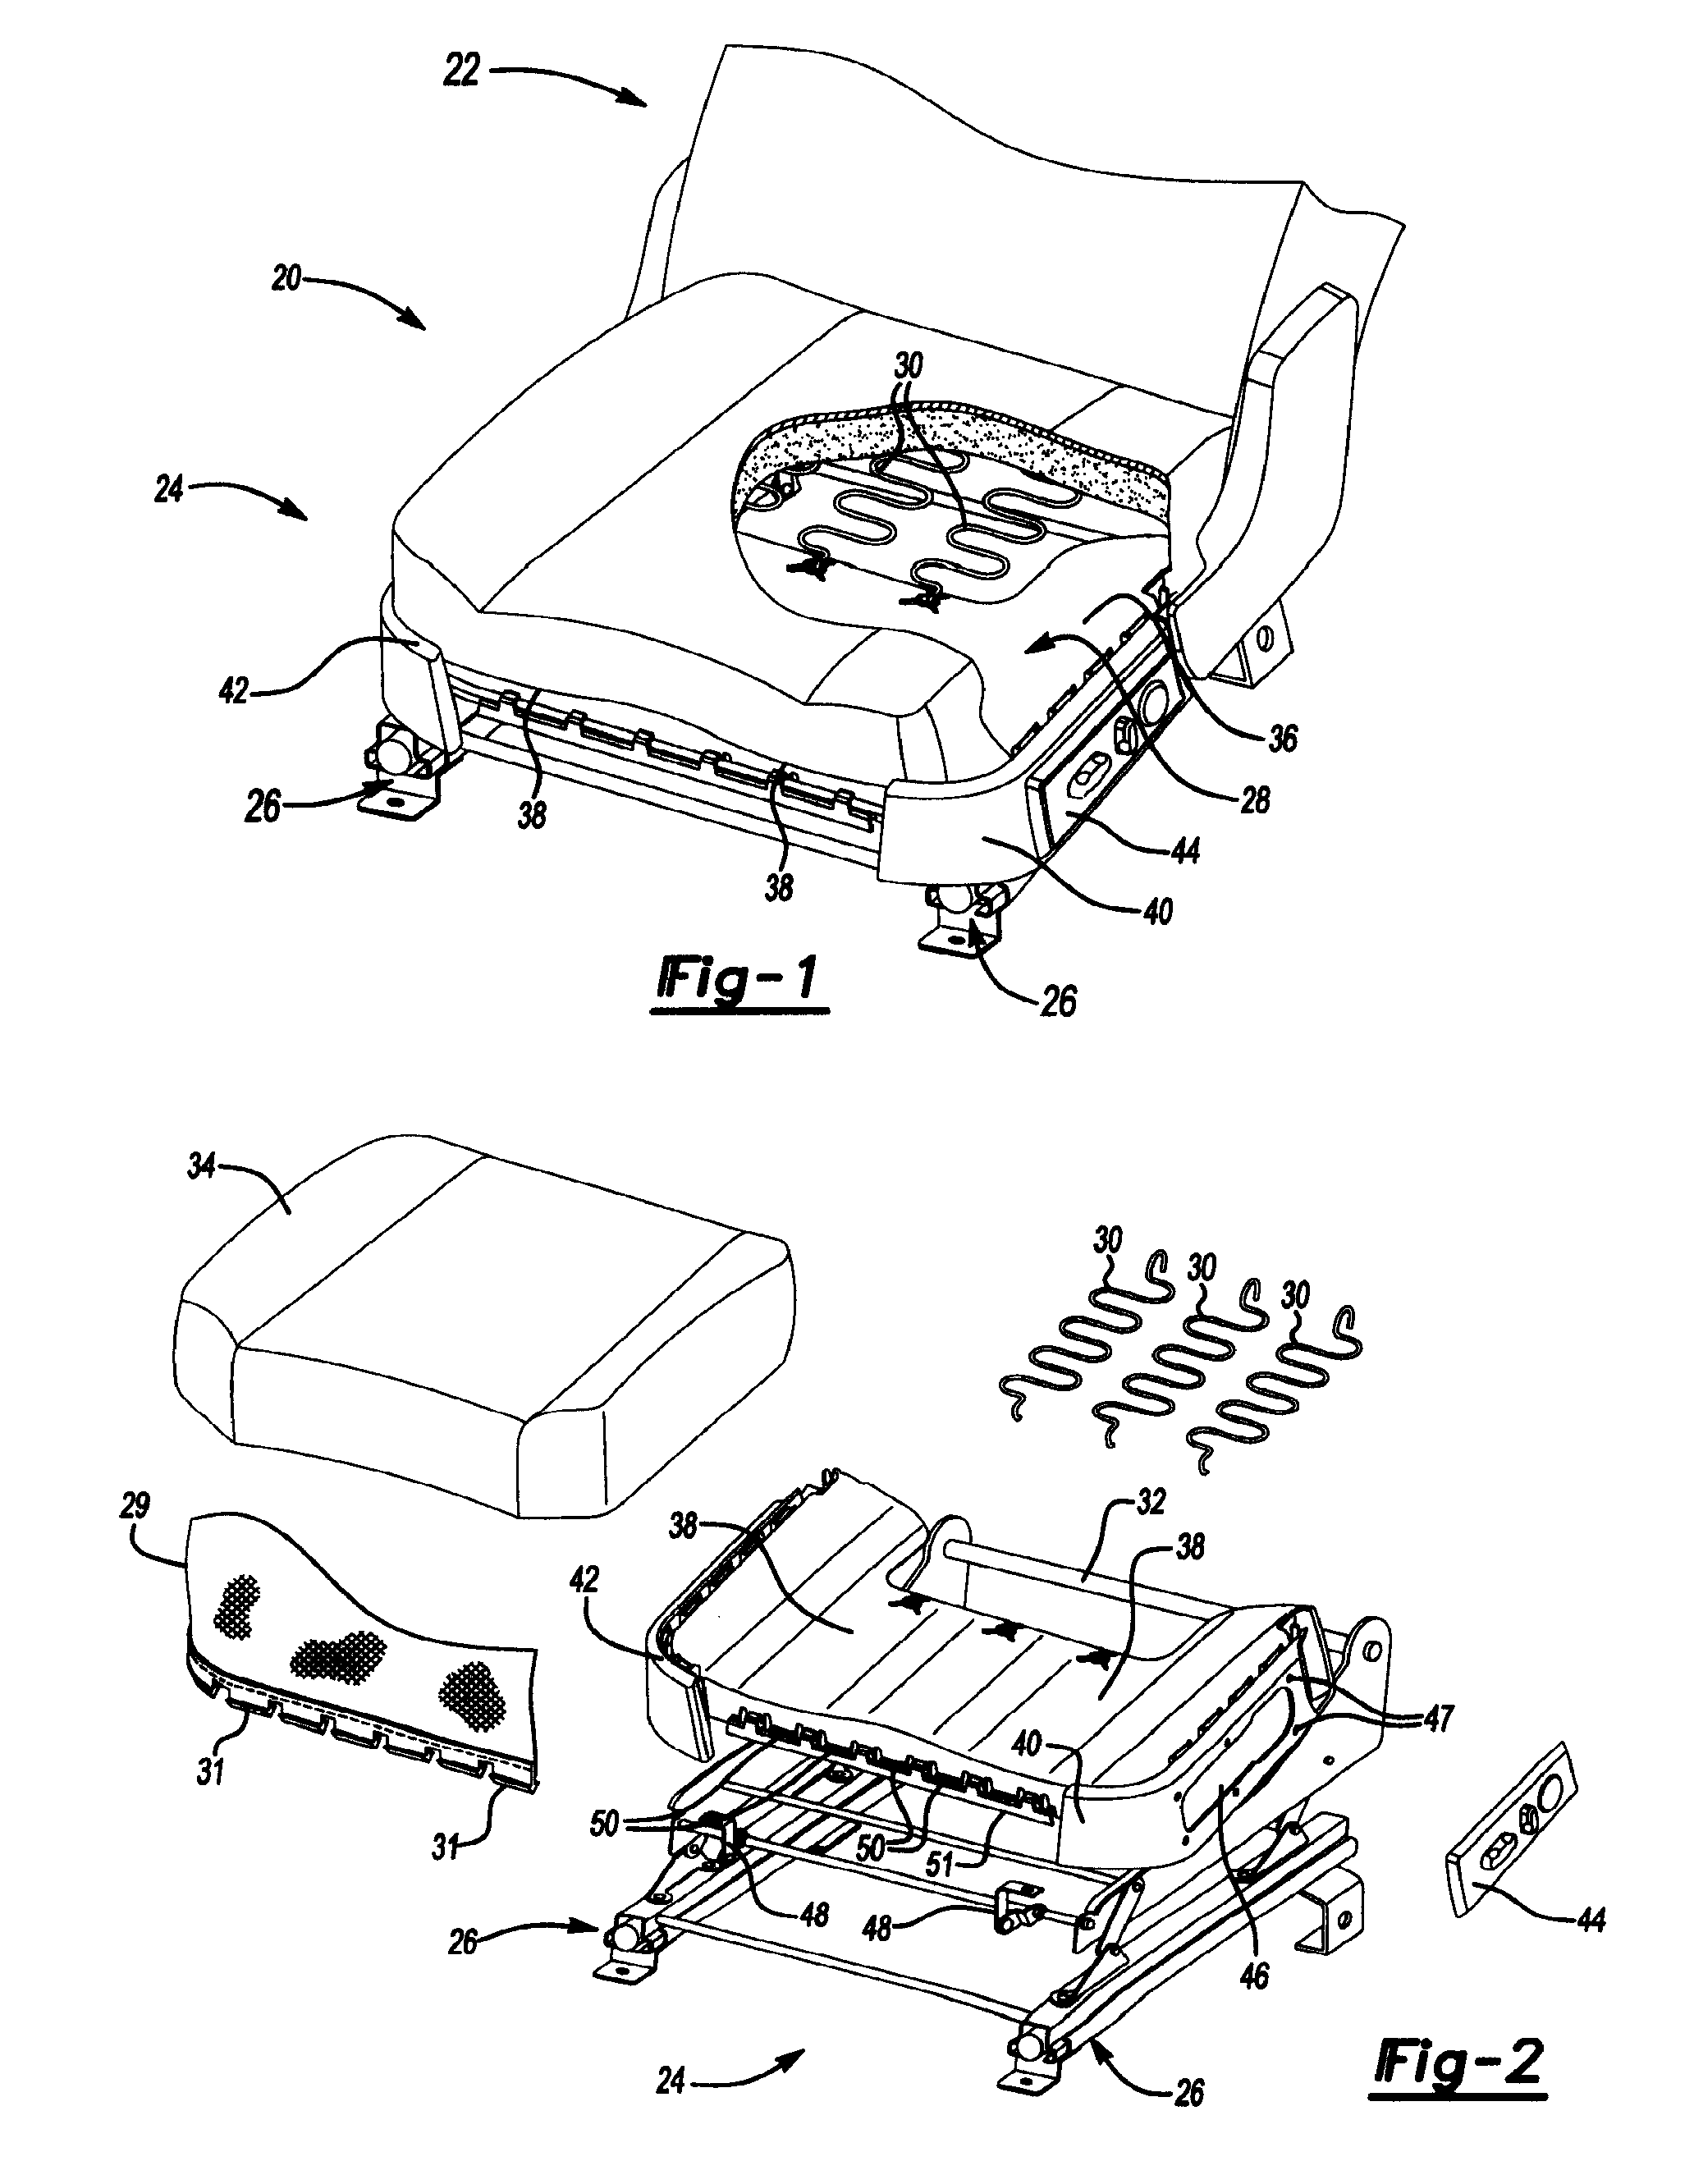 Vehicle seat assembly with polymeric cushion pan